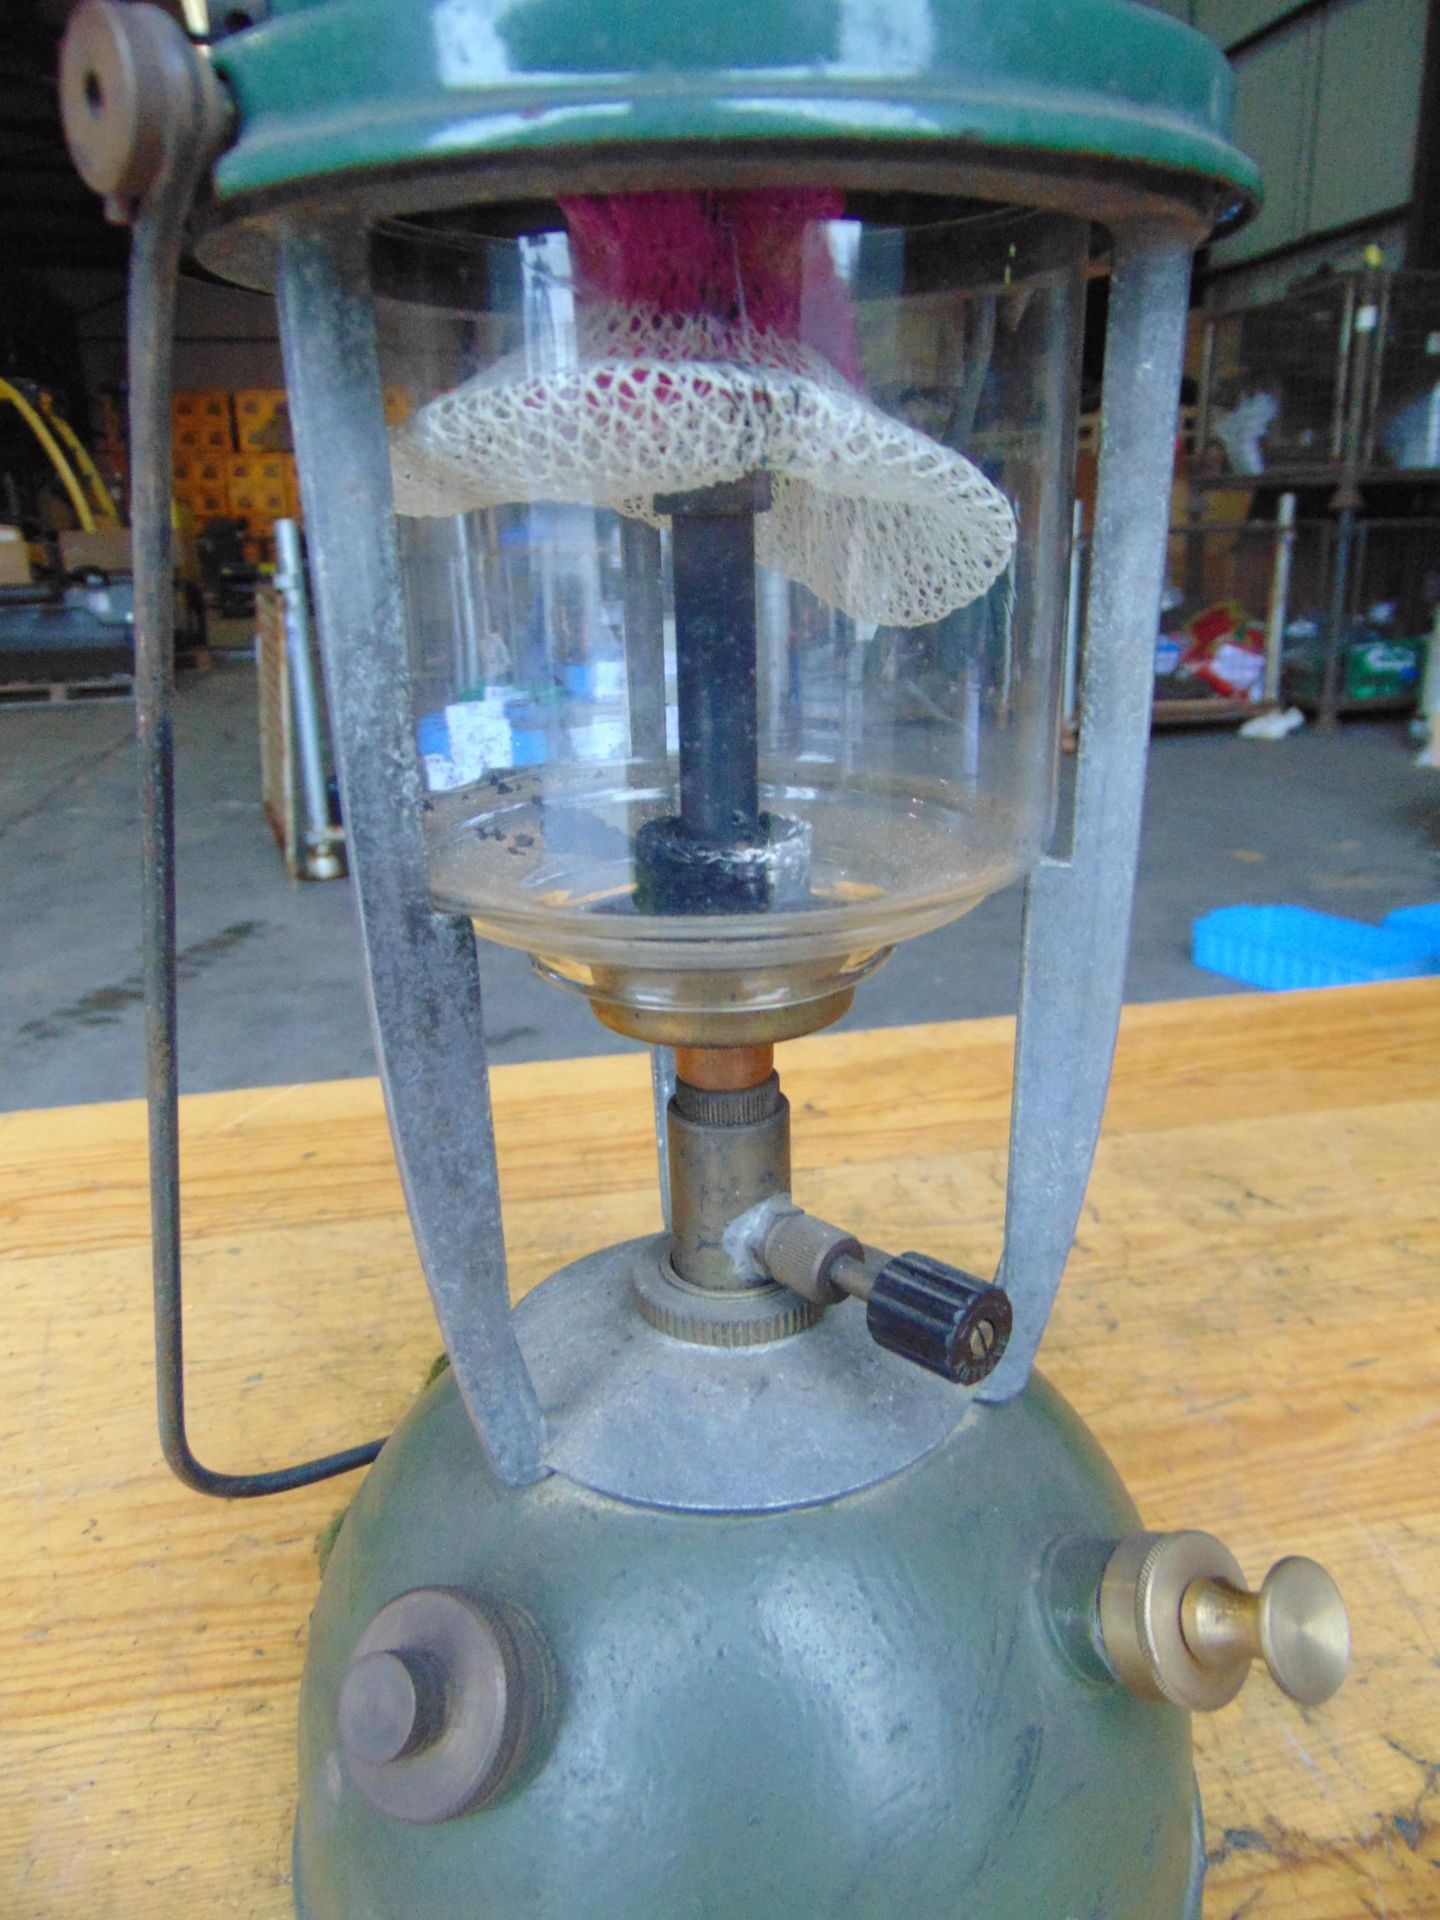 You are bidding on Vapalux British Army Tilley Lamp - Image 4 of 5